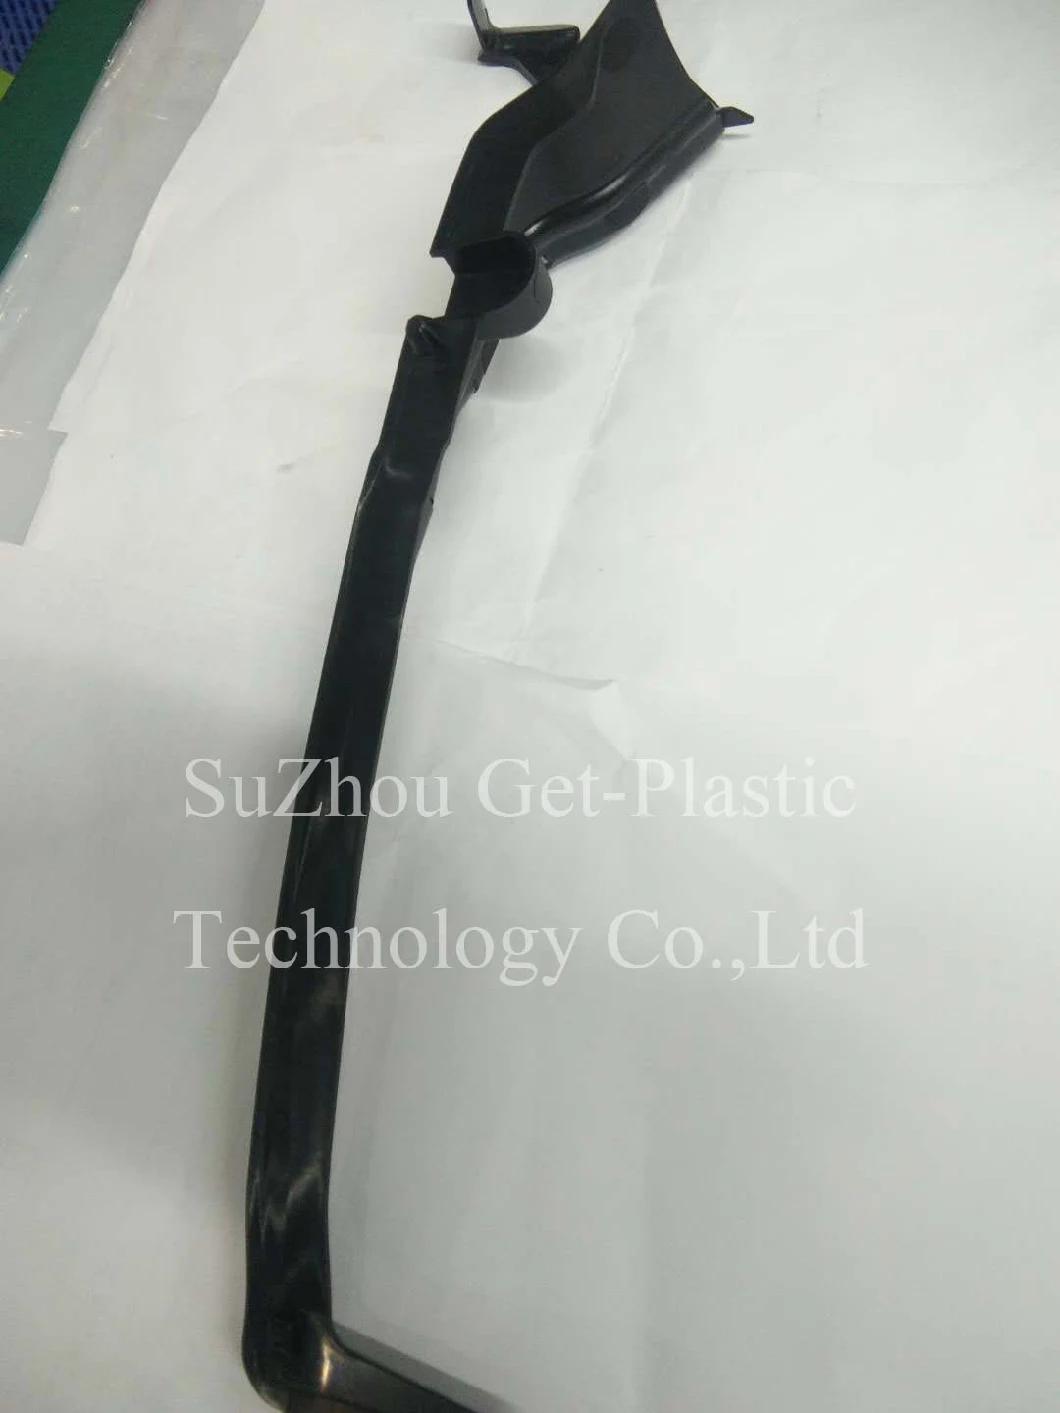 Plastic Injection Mold and Plastic Long Rod in Plastic Factory